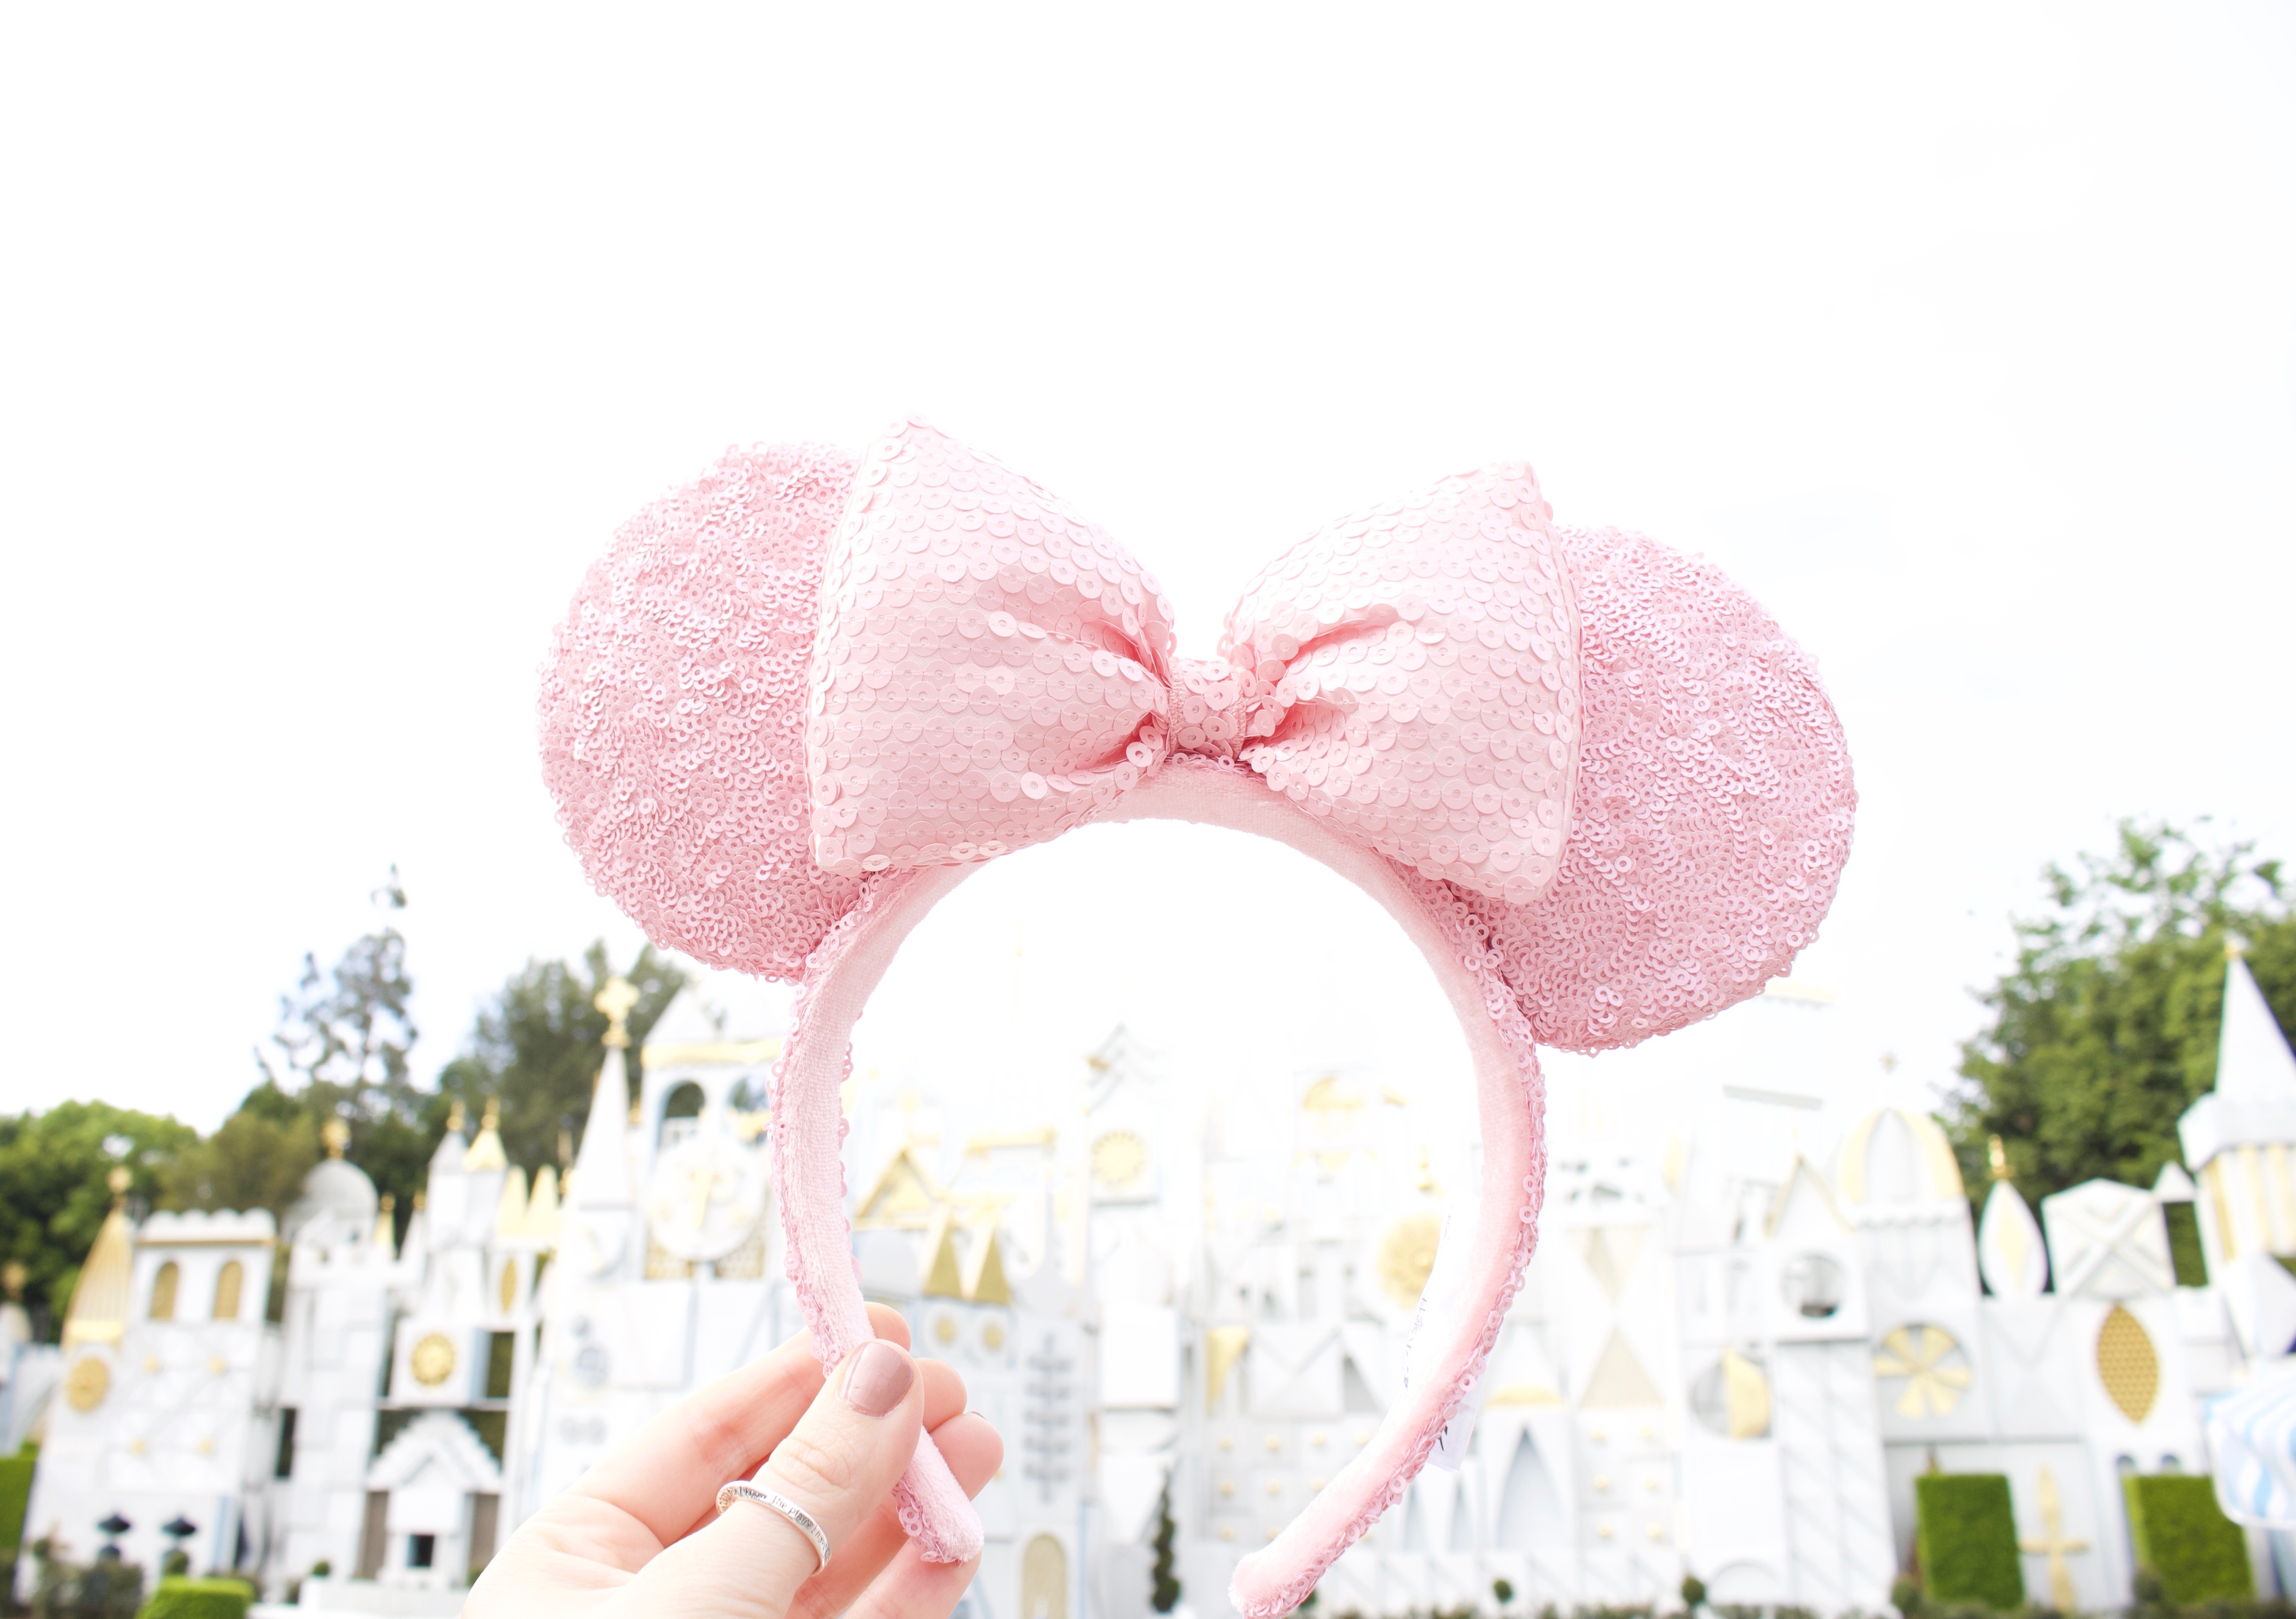 Where to Buy Millennial Pink Minnie Mouse Ears at Disneyland